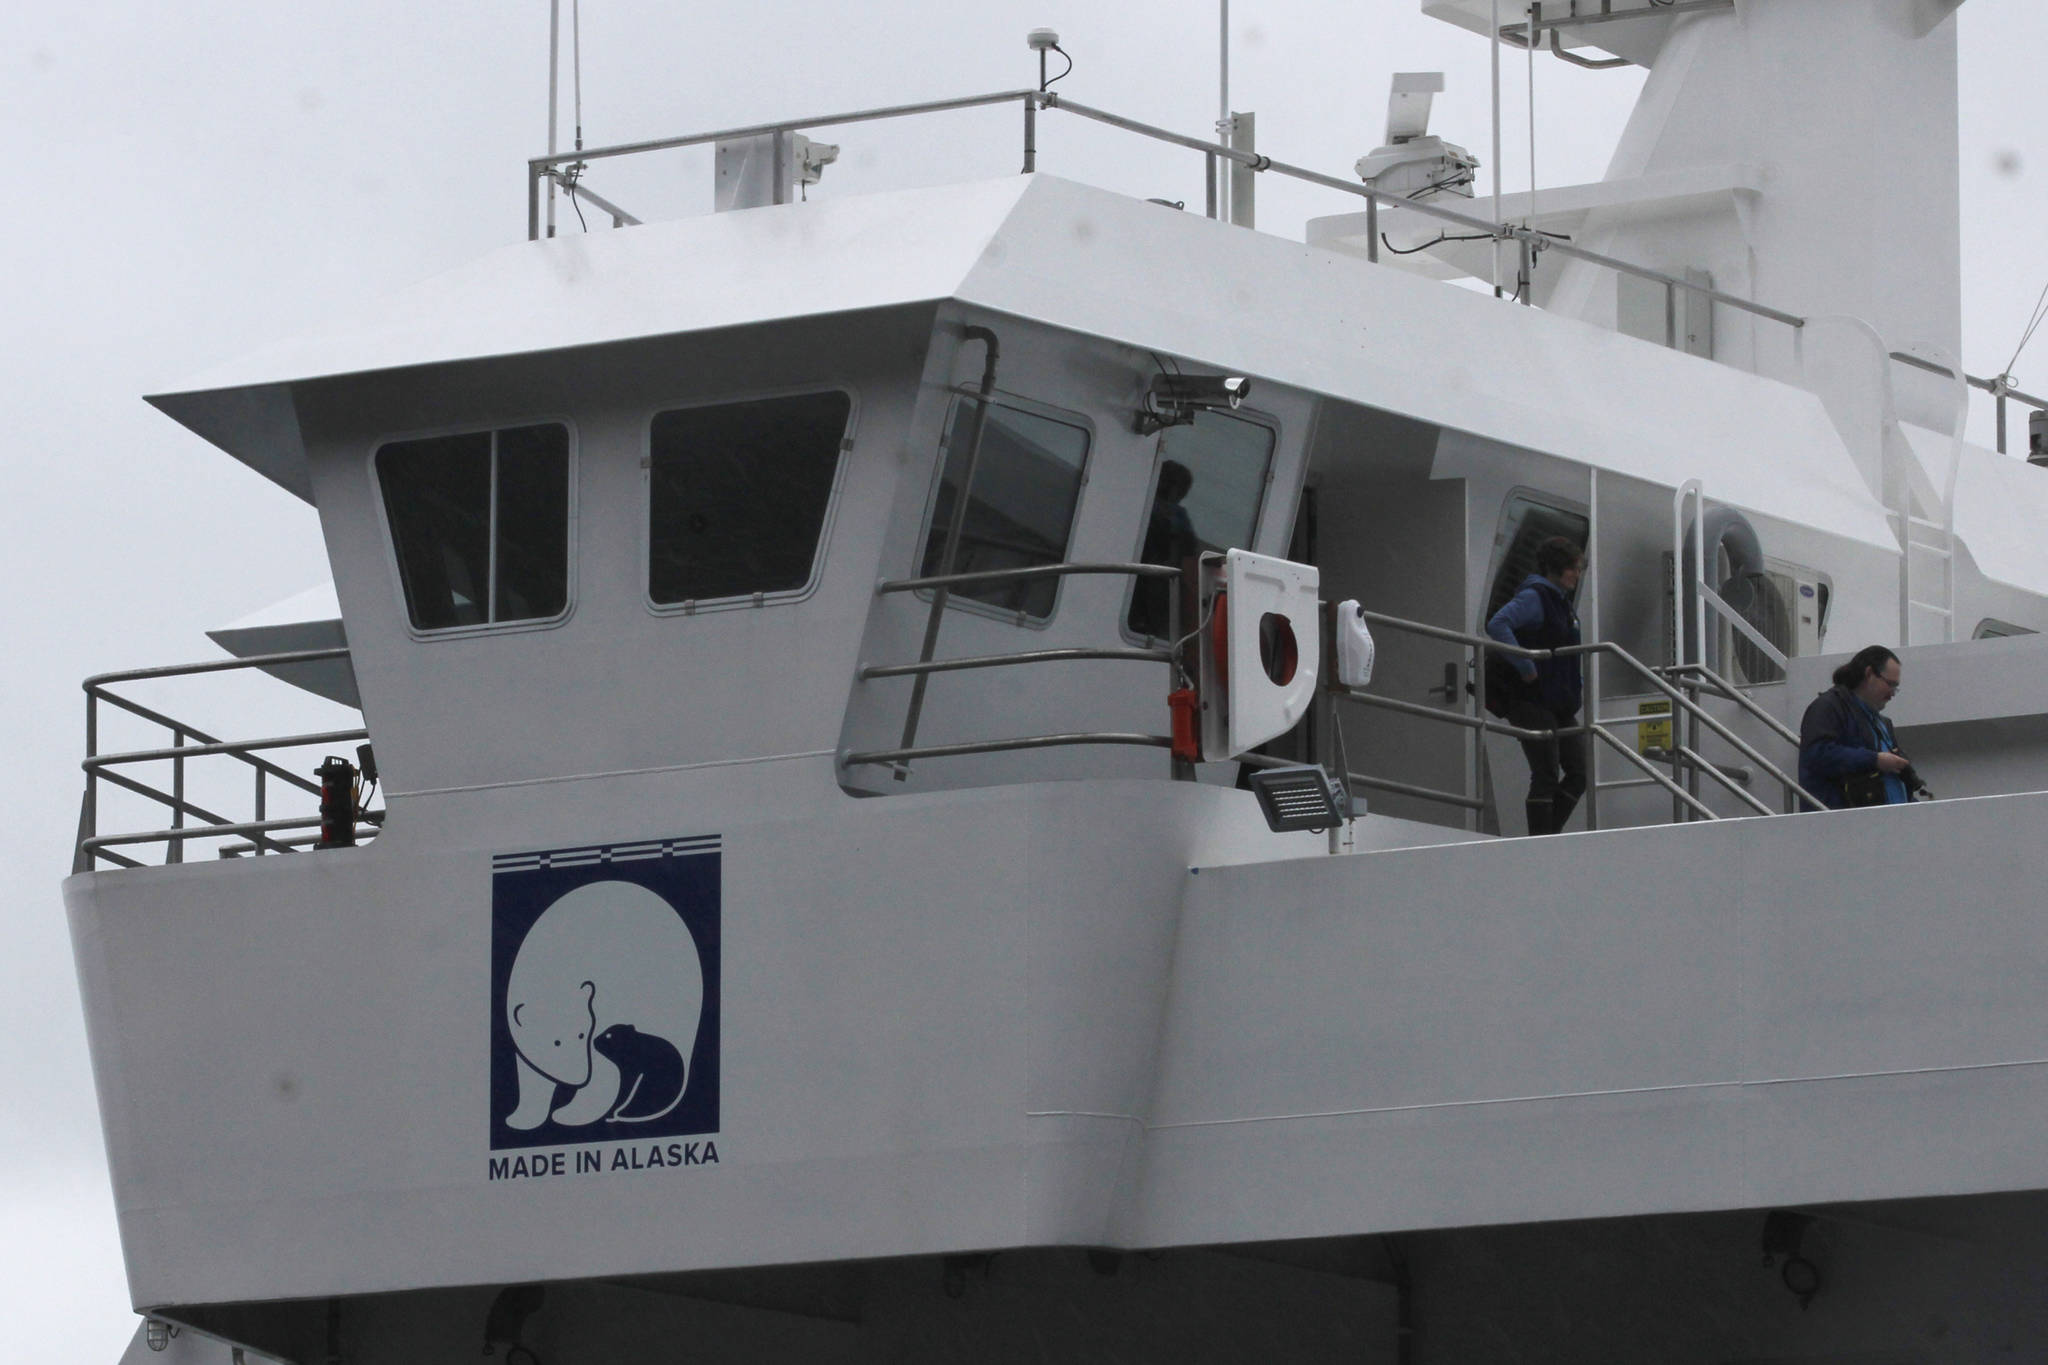 A “Made in Alaska” sticker is pictured on the side of the new ferry Tazlina, which was all constructed in Alaska, on Sunday, May 5, 2019. (Alex McCarthy | Juneau Empire)